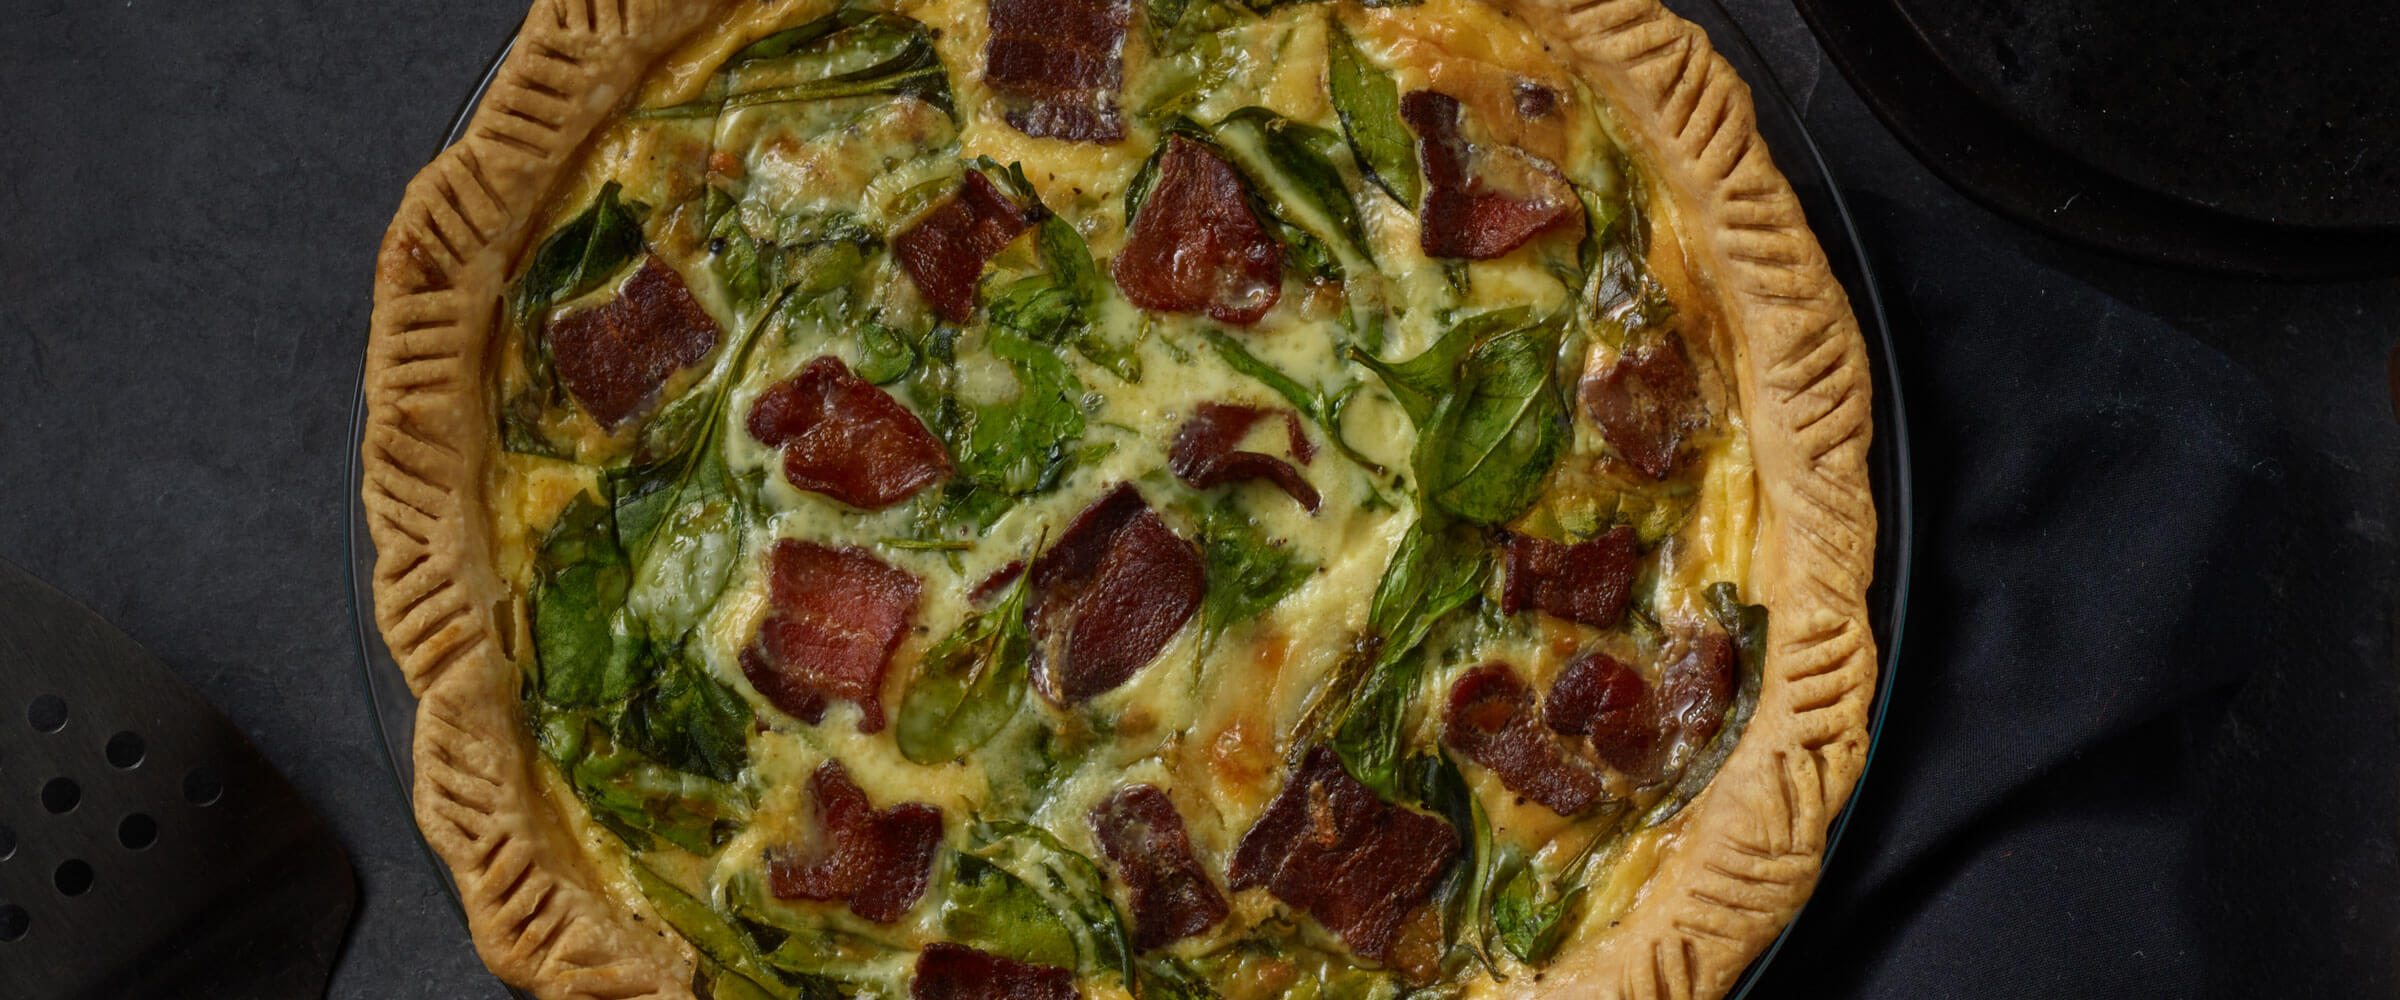 Bacon Spinach Quiche in black pan